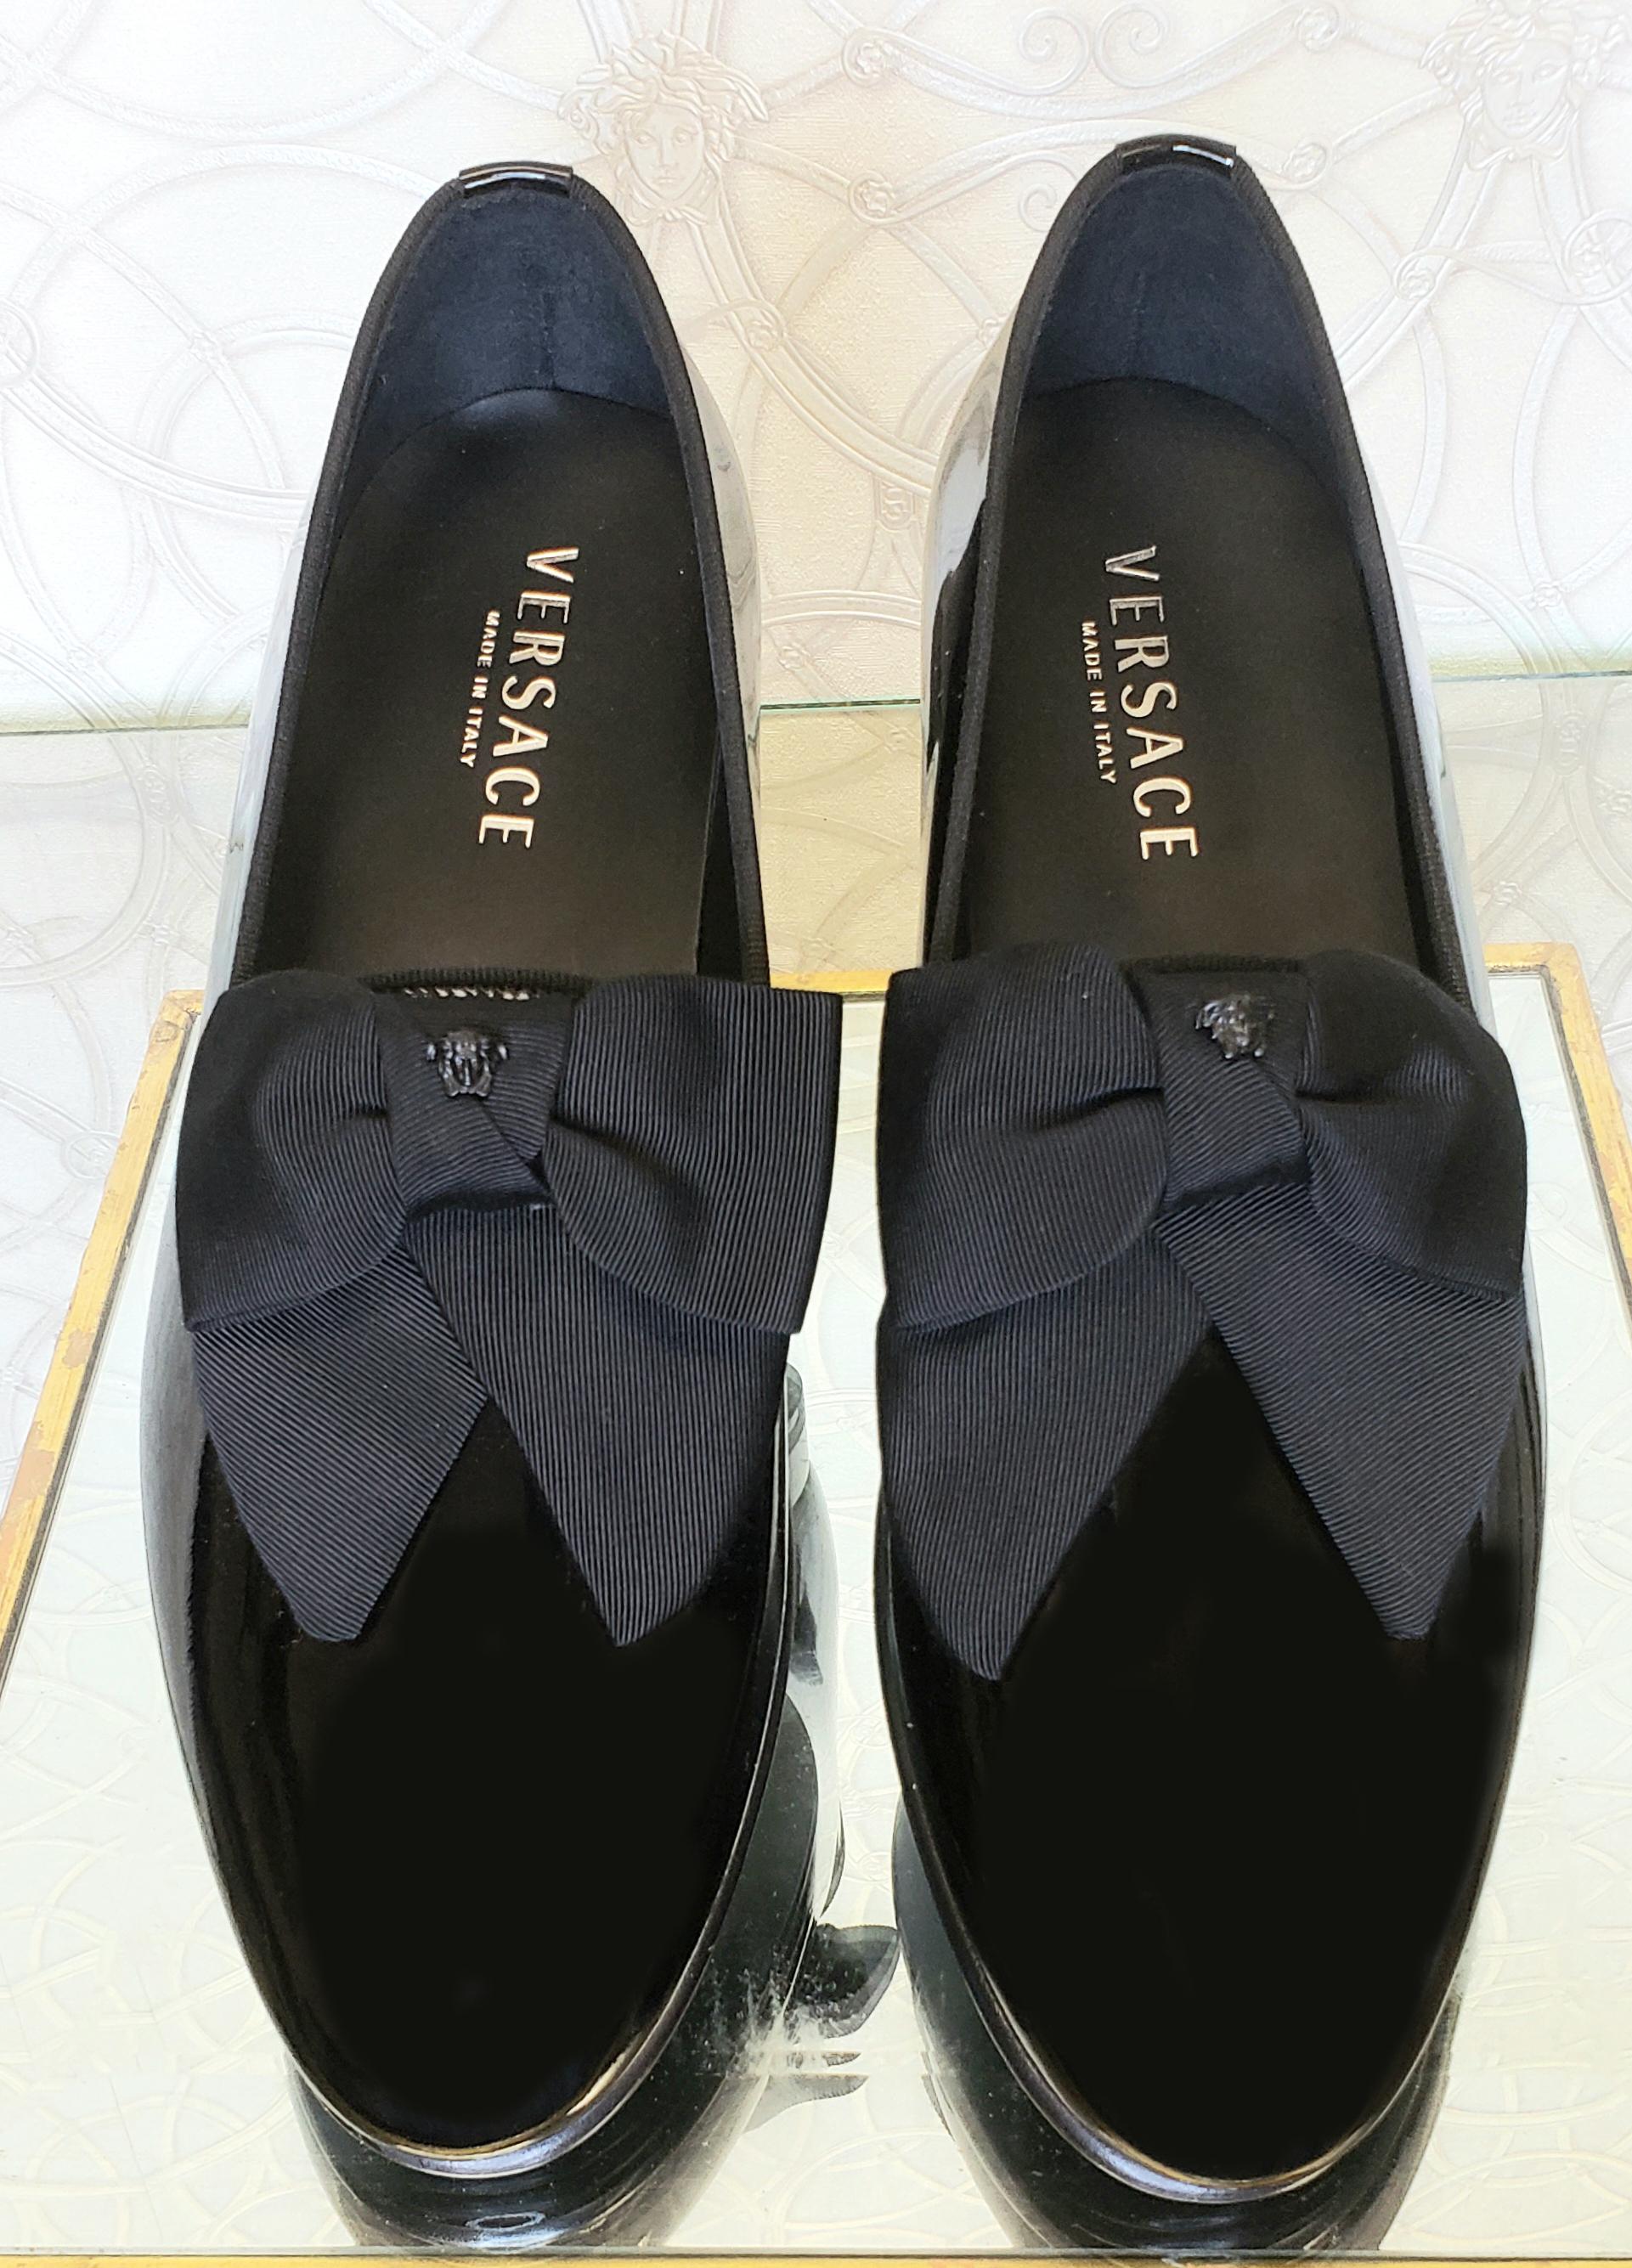 black patent loafer shoes